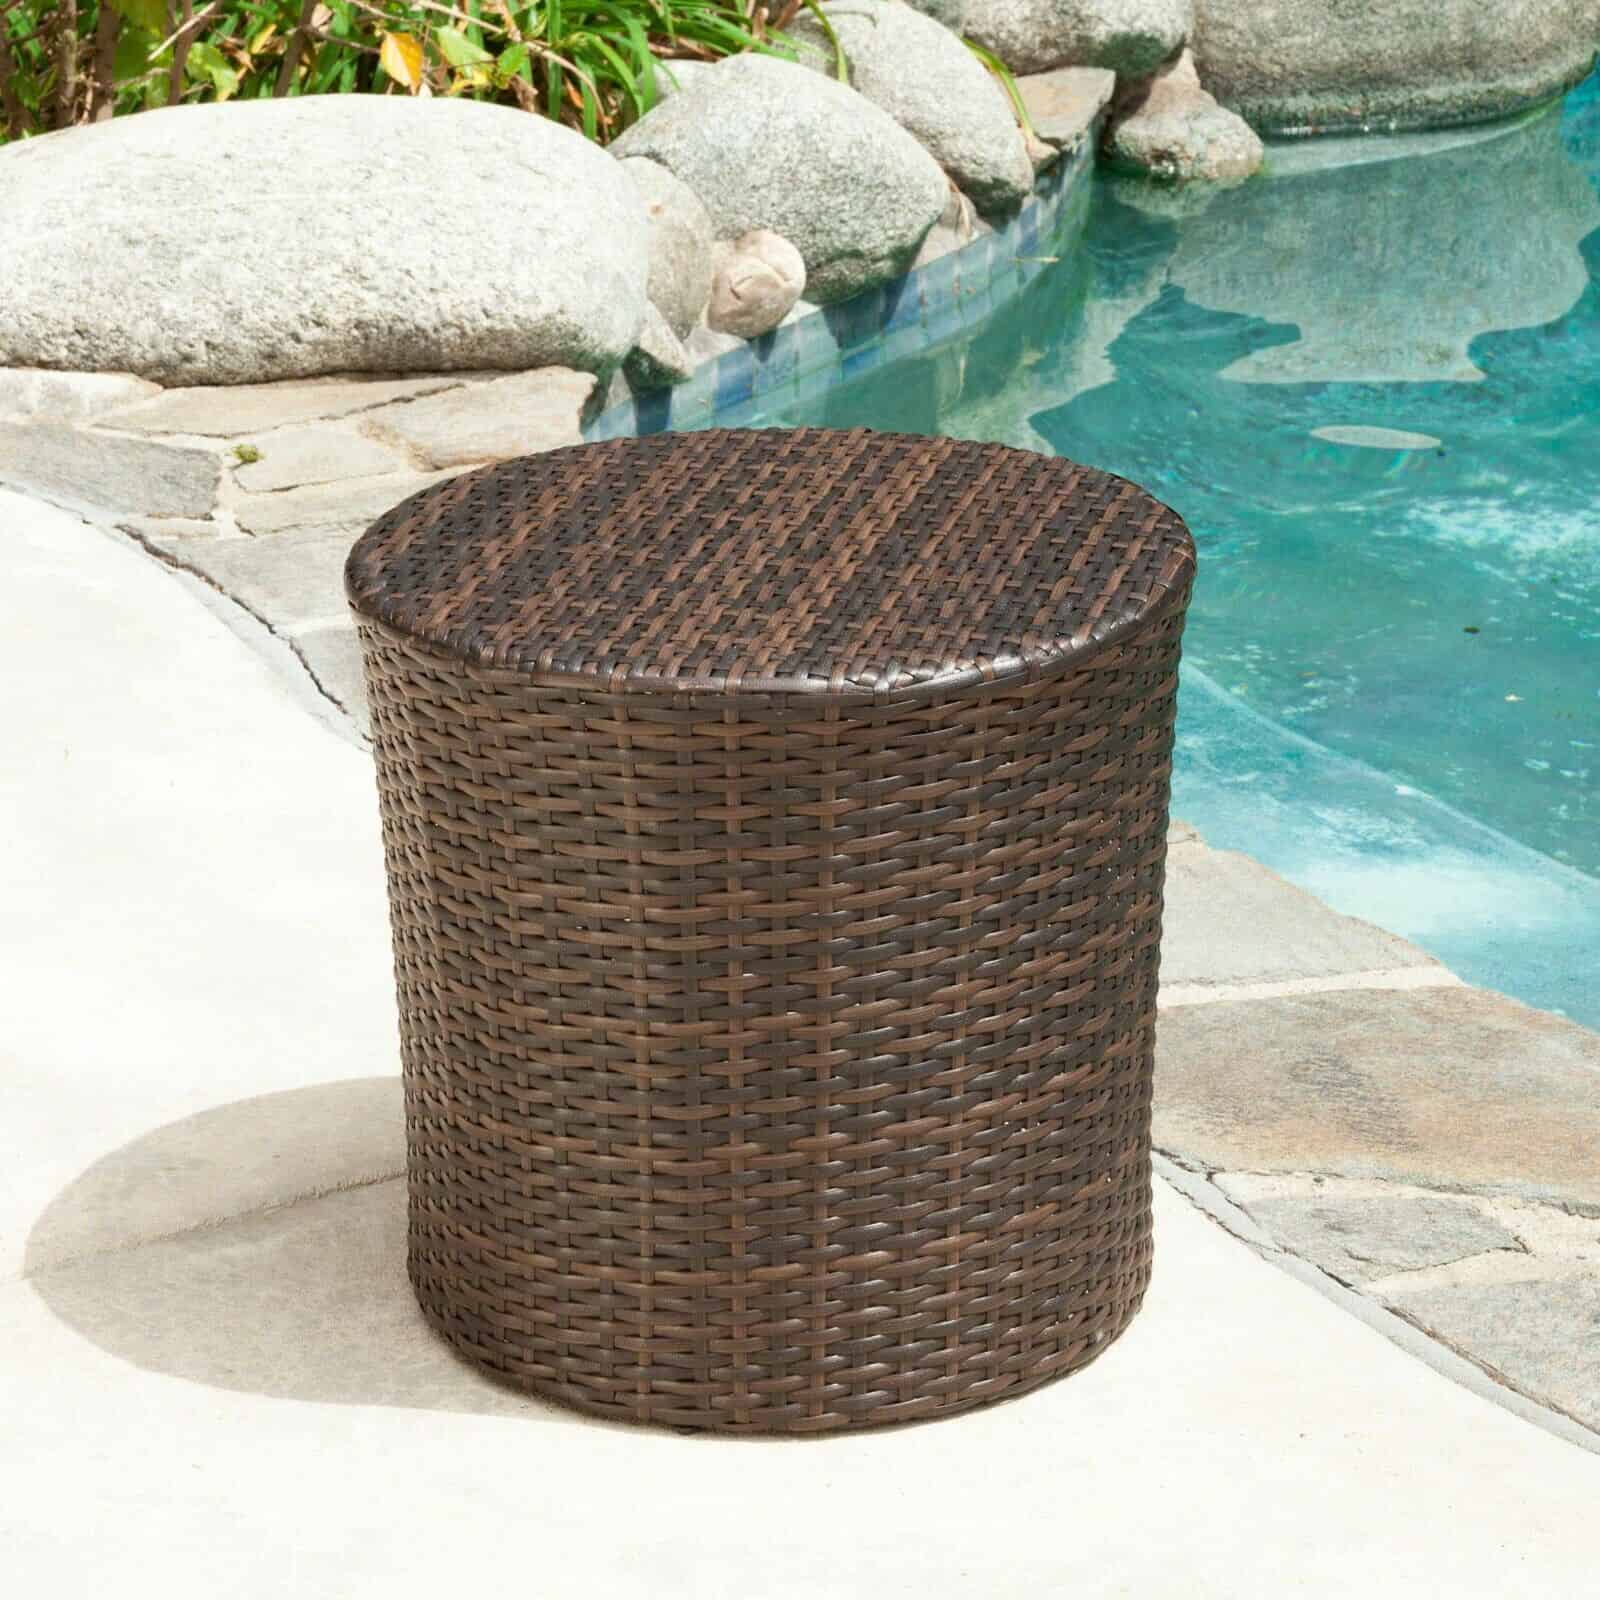 A wicker side table next to a pool.